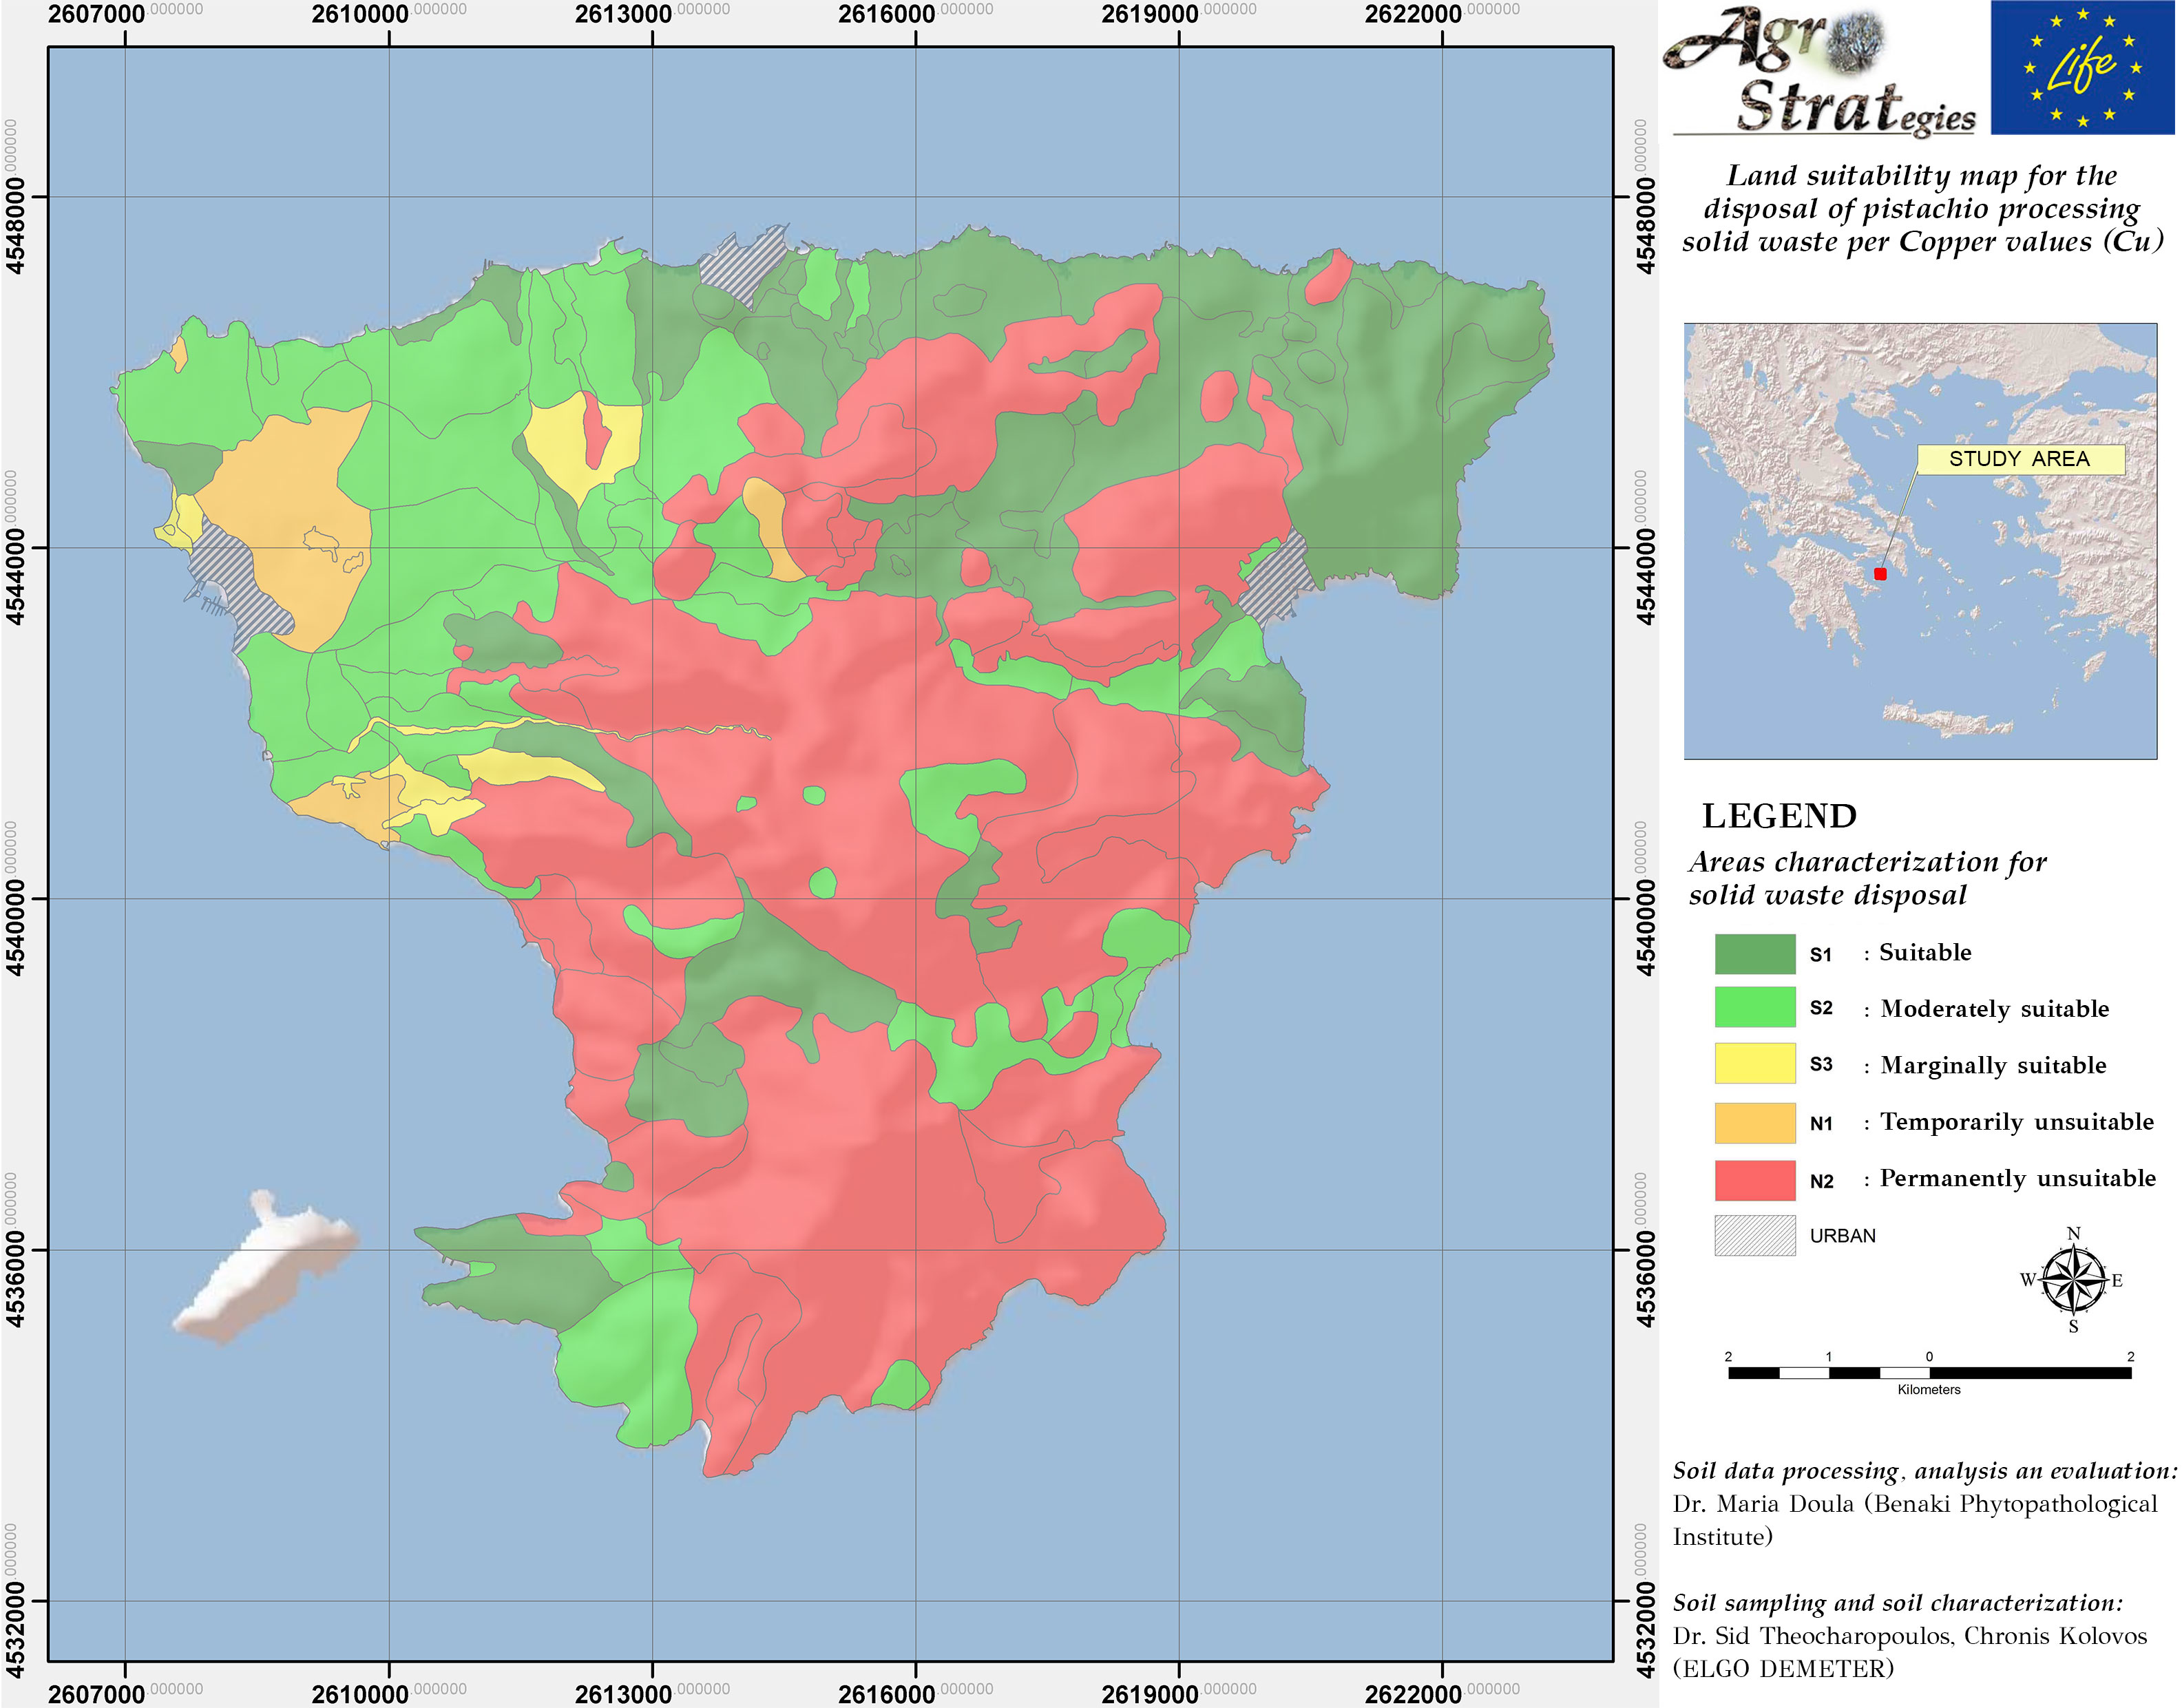 Dr. Maria Doula Land Suitability Map of Aegina island, Greece, for the distribution of solid pistachio waste as per soil available Copper content (LIFE-AgroStrat)